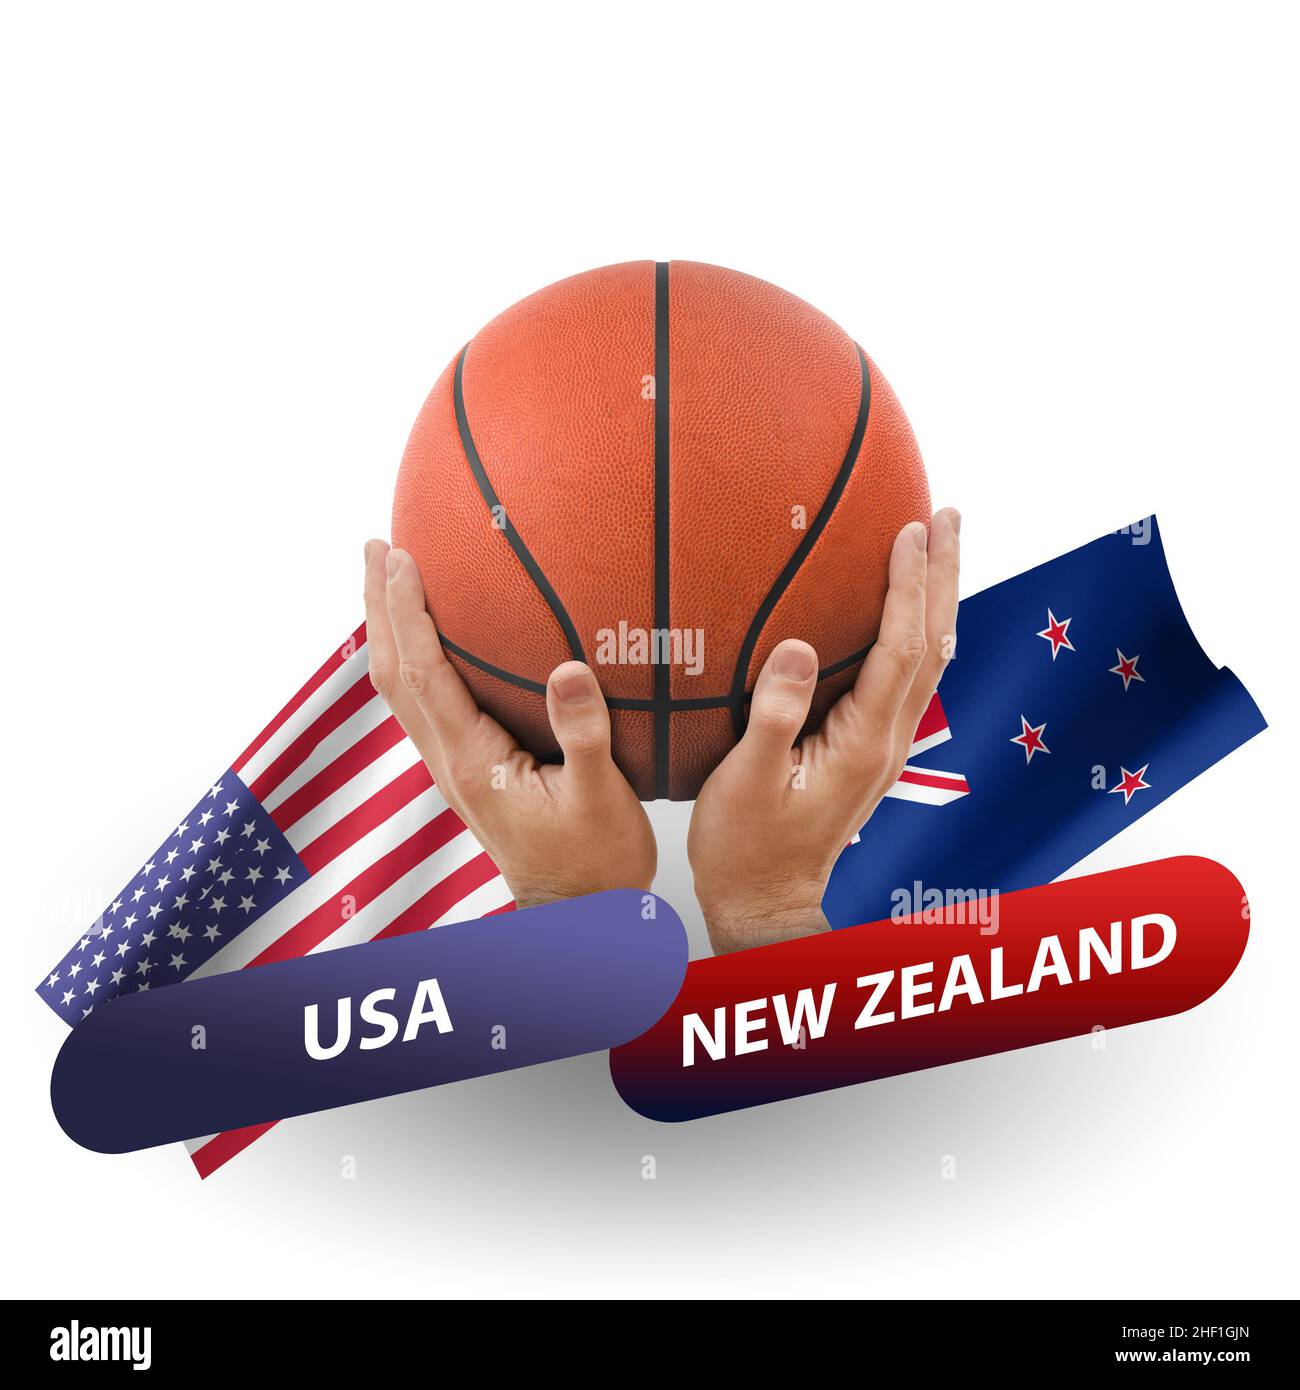 Usa vs new zealand Cut Out Stock Images & Pictures - Alamy